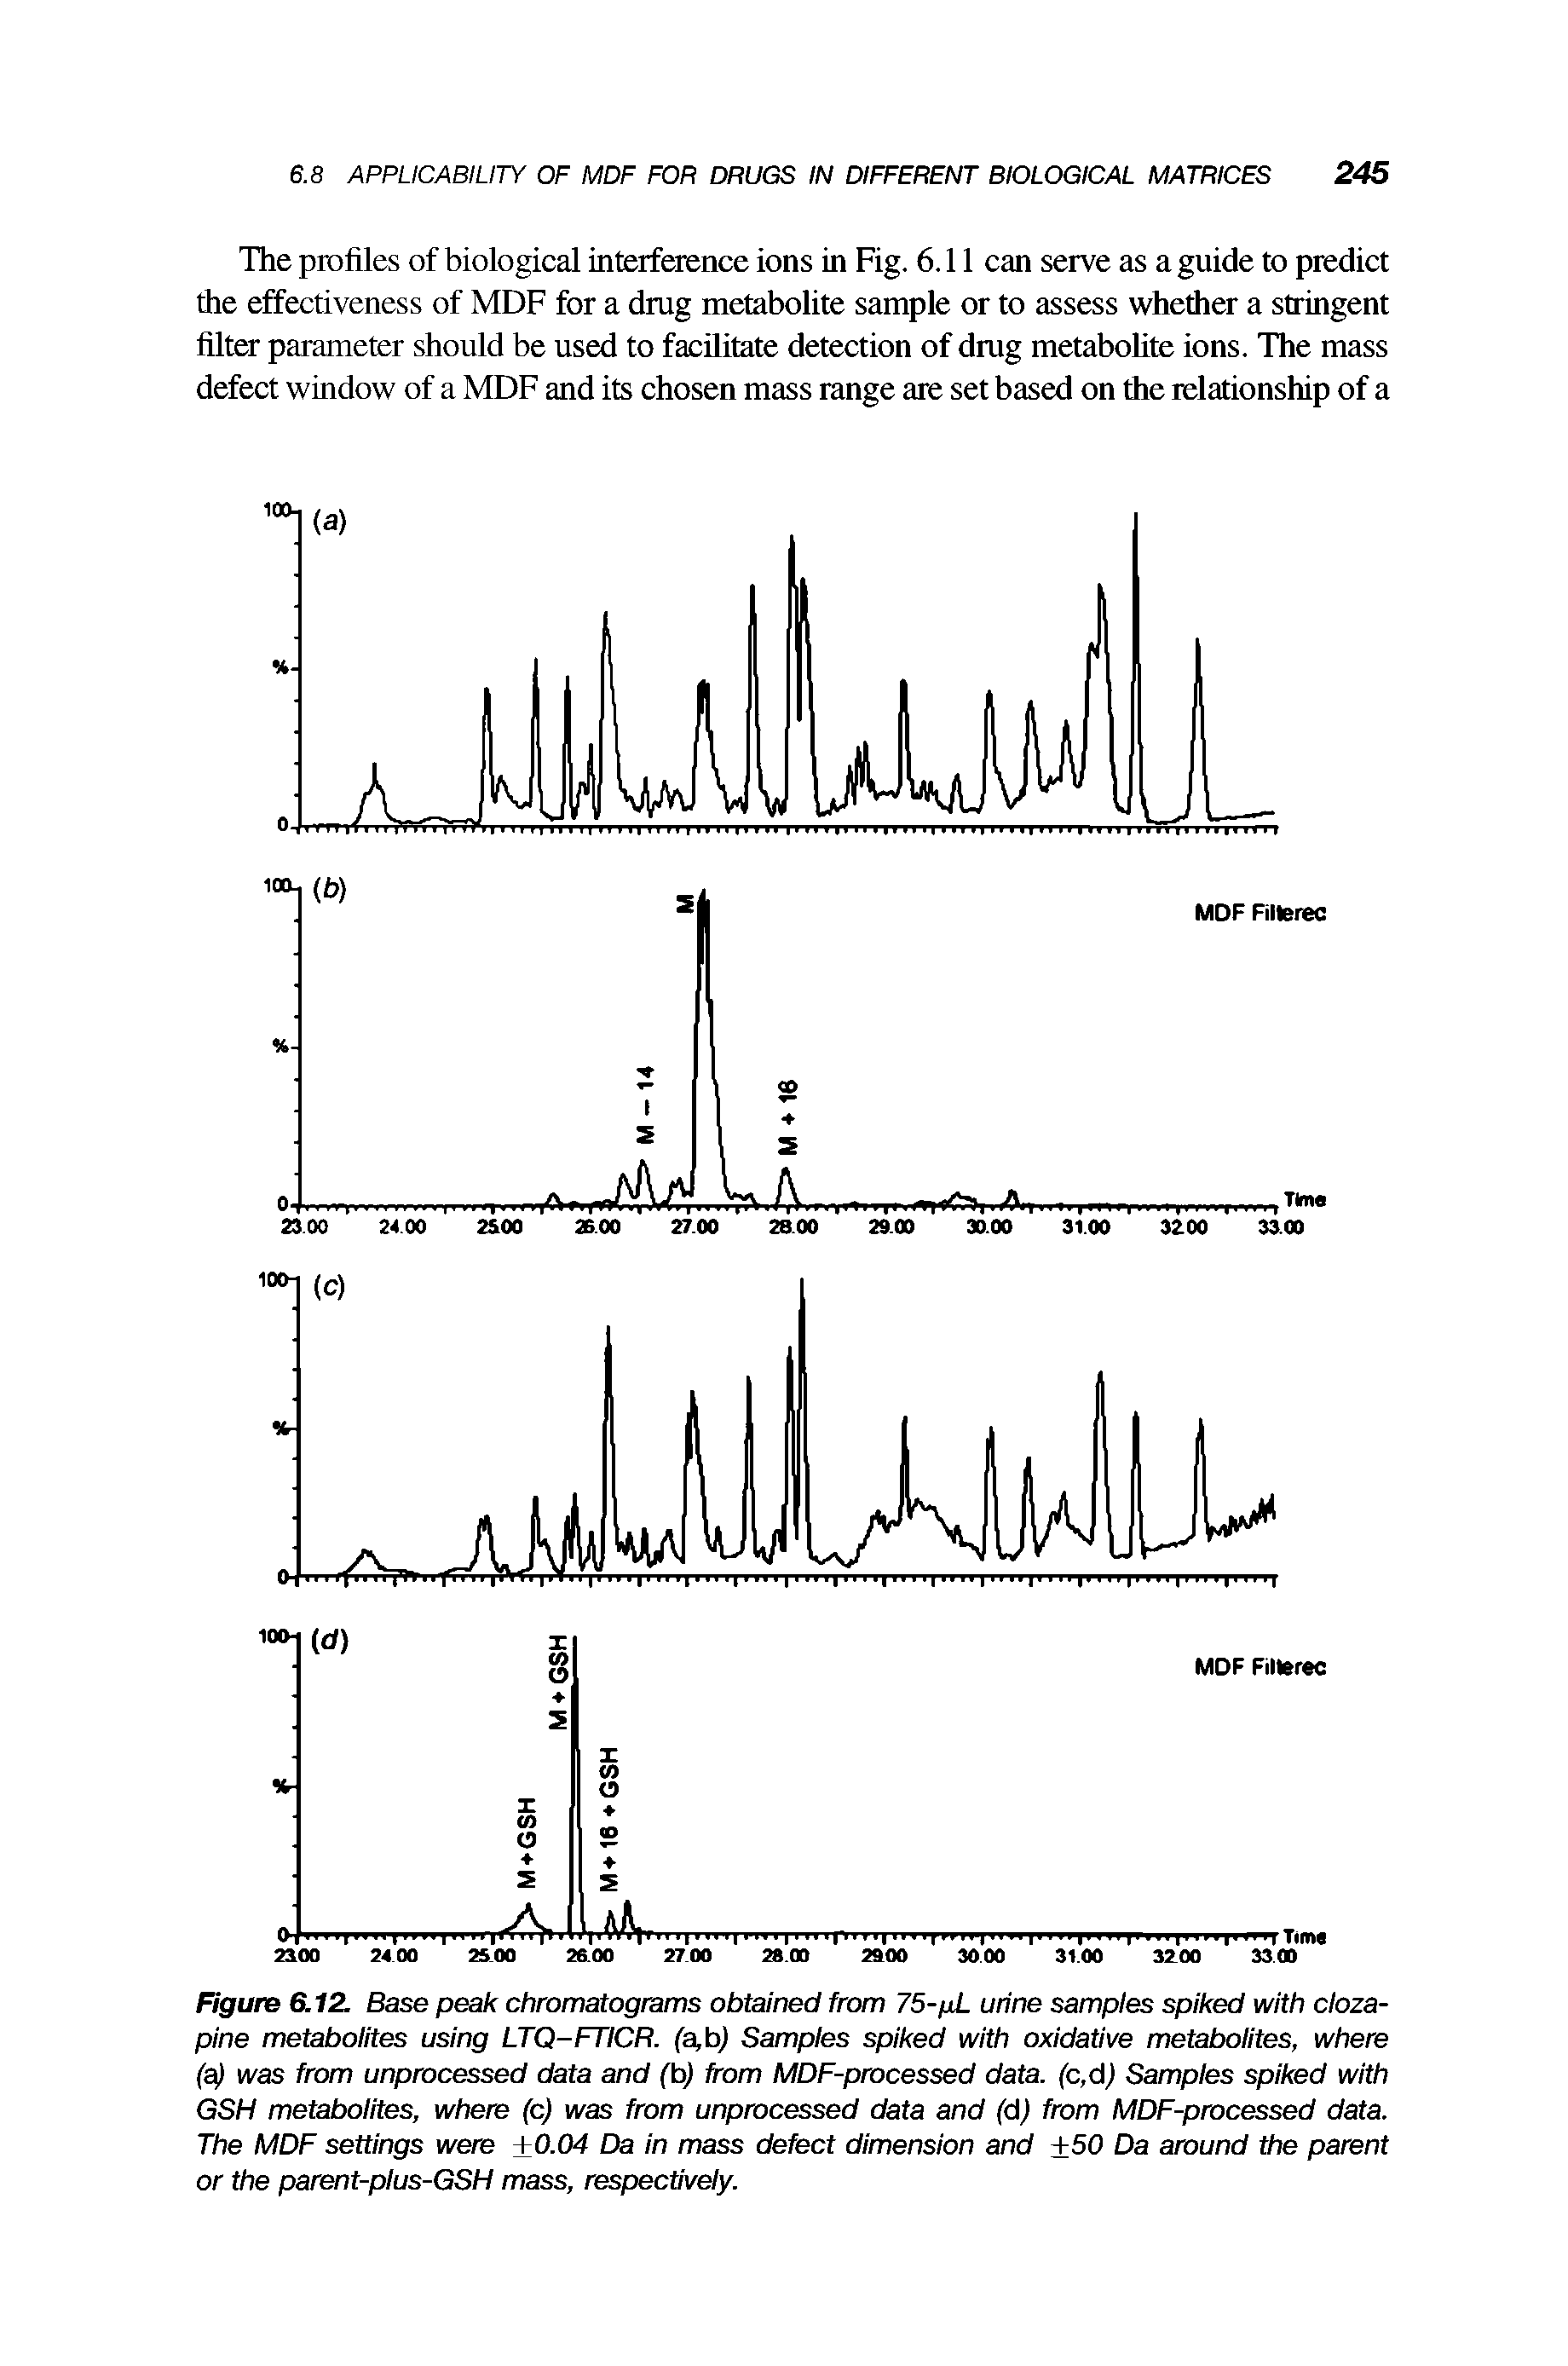 Figure 6.12. Base peak chromatograms obtained from 75-/xL urine samples spiked with clozapine metabolites using LTQ-FTICR. (a,b) Samples spiked with oxidative metabolites, where (a) was from unprocessed data and (b) from MDF-processed data. (c,d) Samples spiked with GSH metabolites, where (c) was from unprocessed data and (dj from MDF-processed data. The MDF settings were 0.04 Da in mass defect dimension and 50 Da around the parent or the parent-plus-GSH mass, respectively.